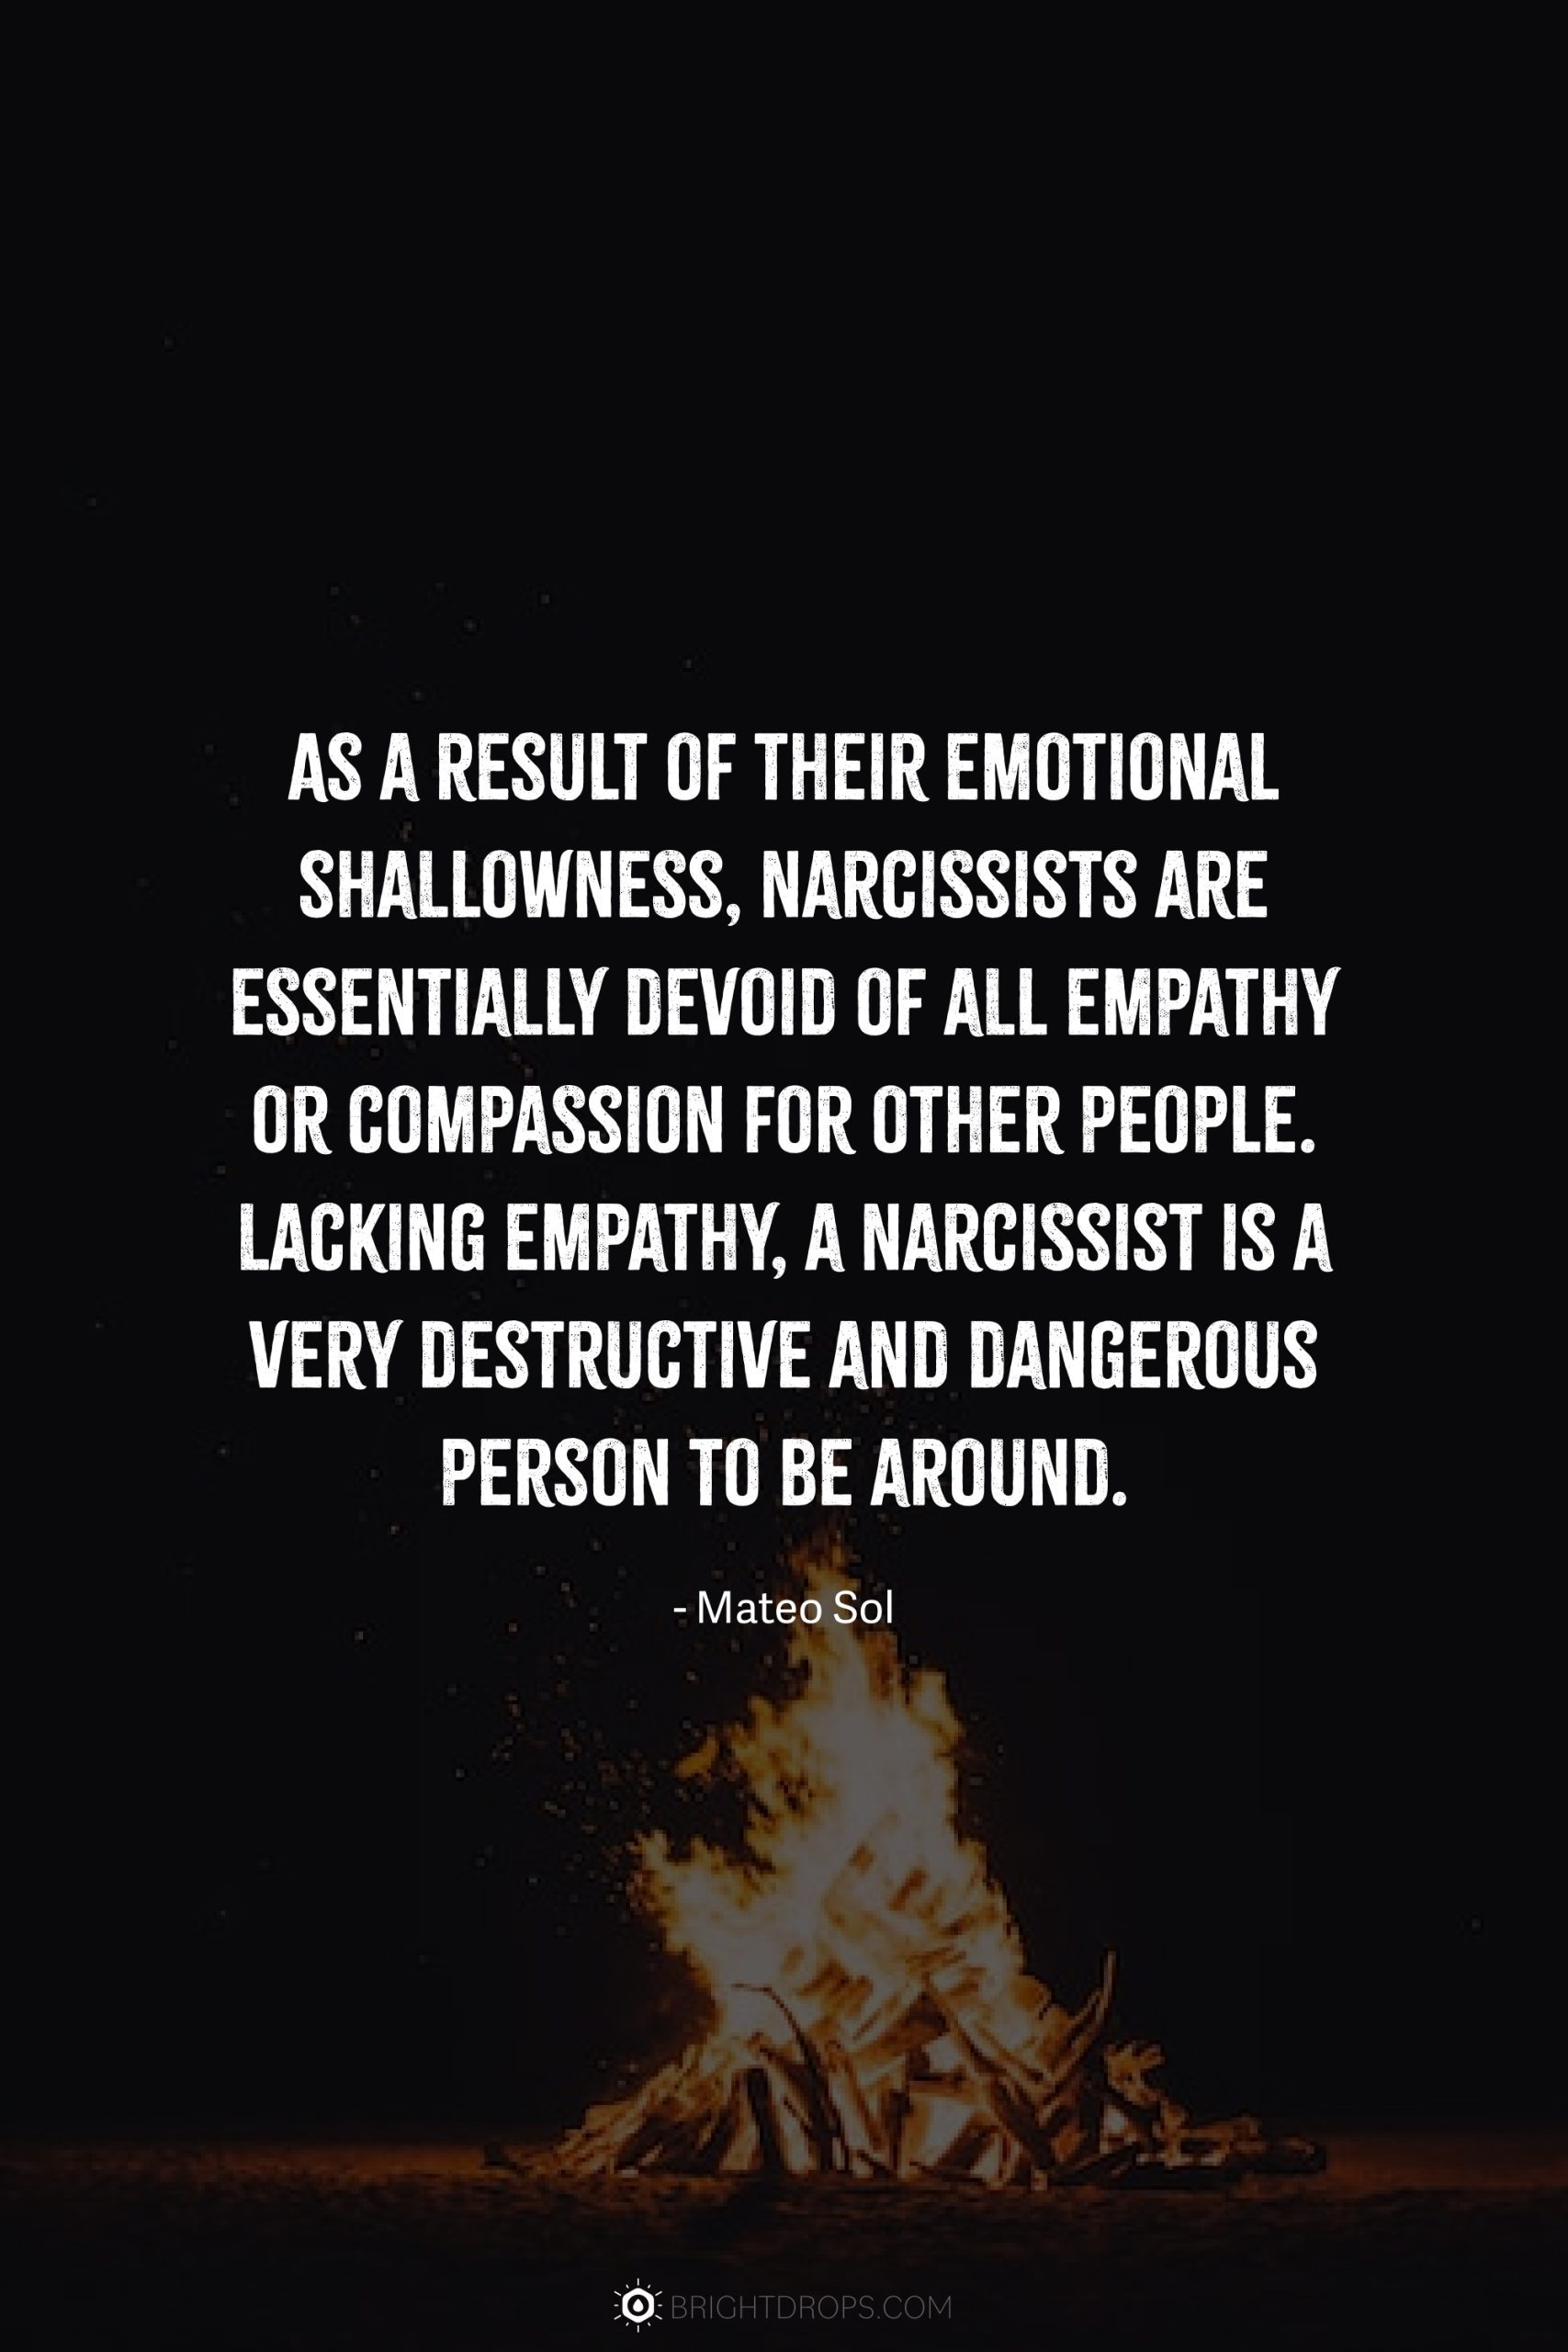 As a result of their emotional shallowness, narcissists are essentially devoid of all empathy or compassion for other people. Lacking empathy, a narcissist is a very destructive and dangerous person to be around.